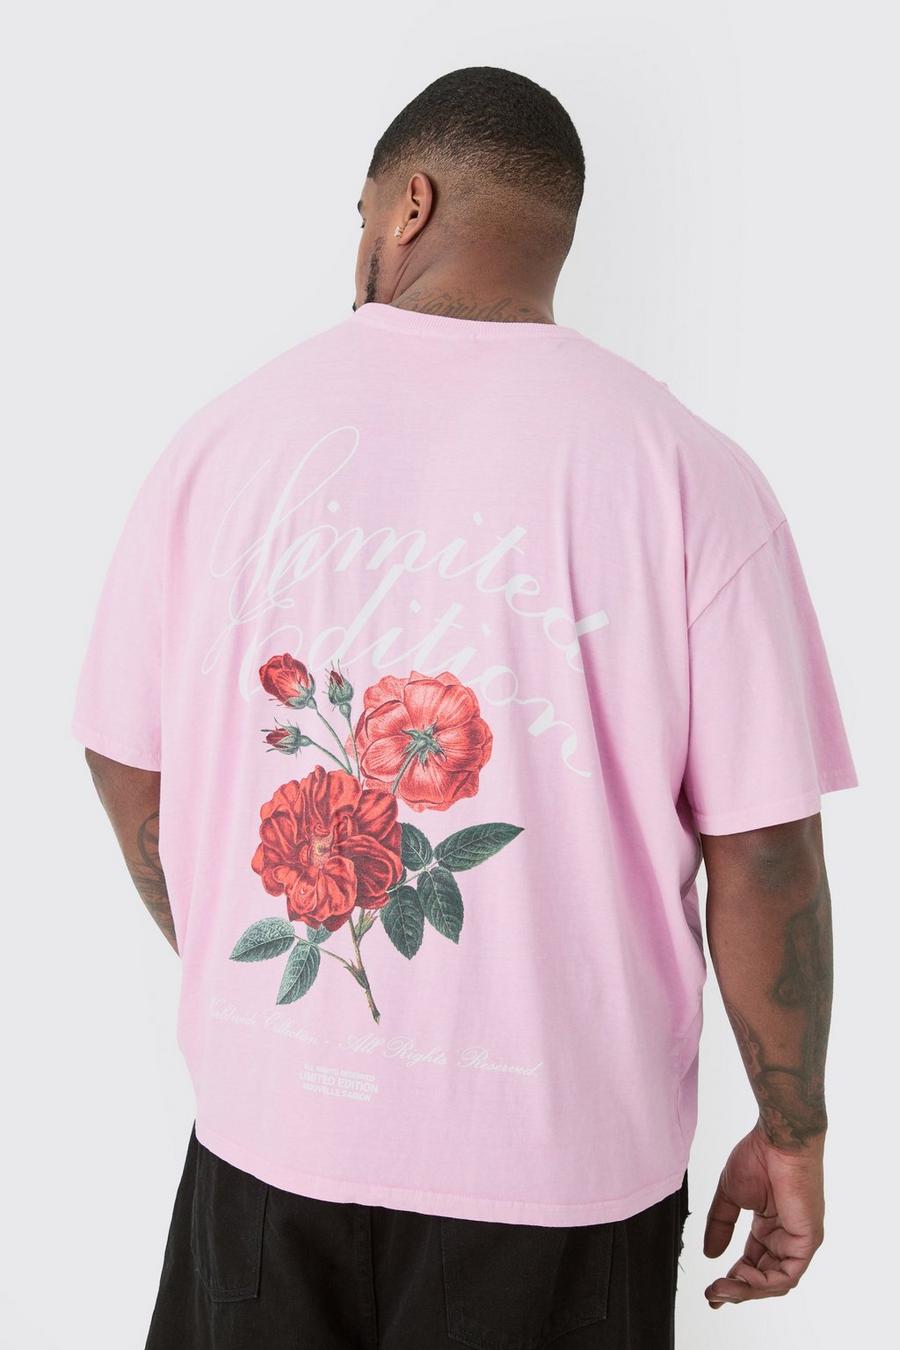 T-shirt Plus Size Lmtd Edition rosa con grafica a fiori, Pink image number 1